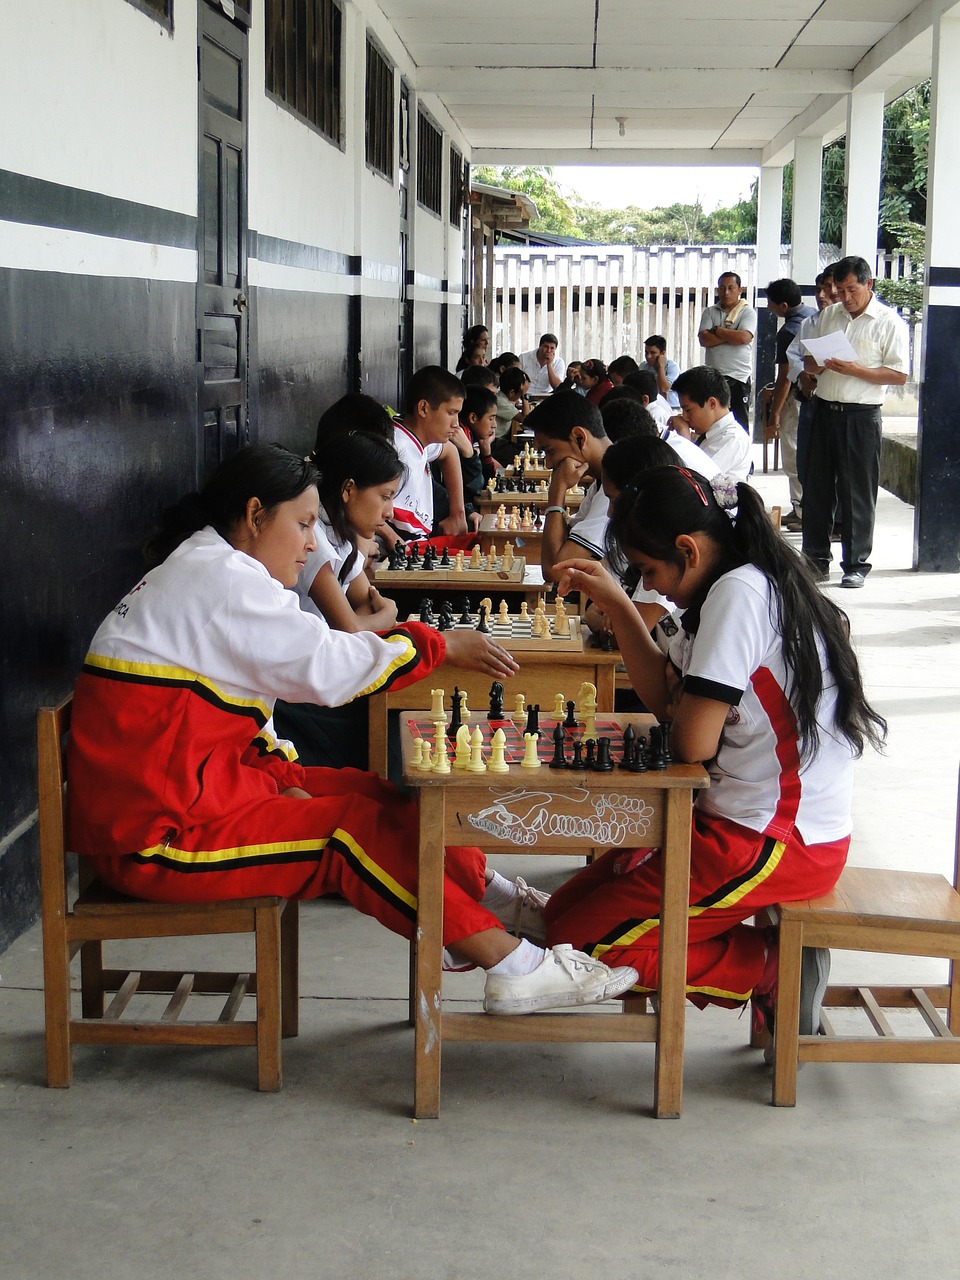 competition sports chess free photo